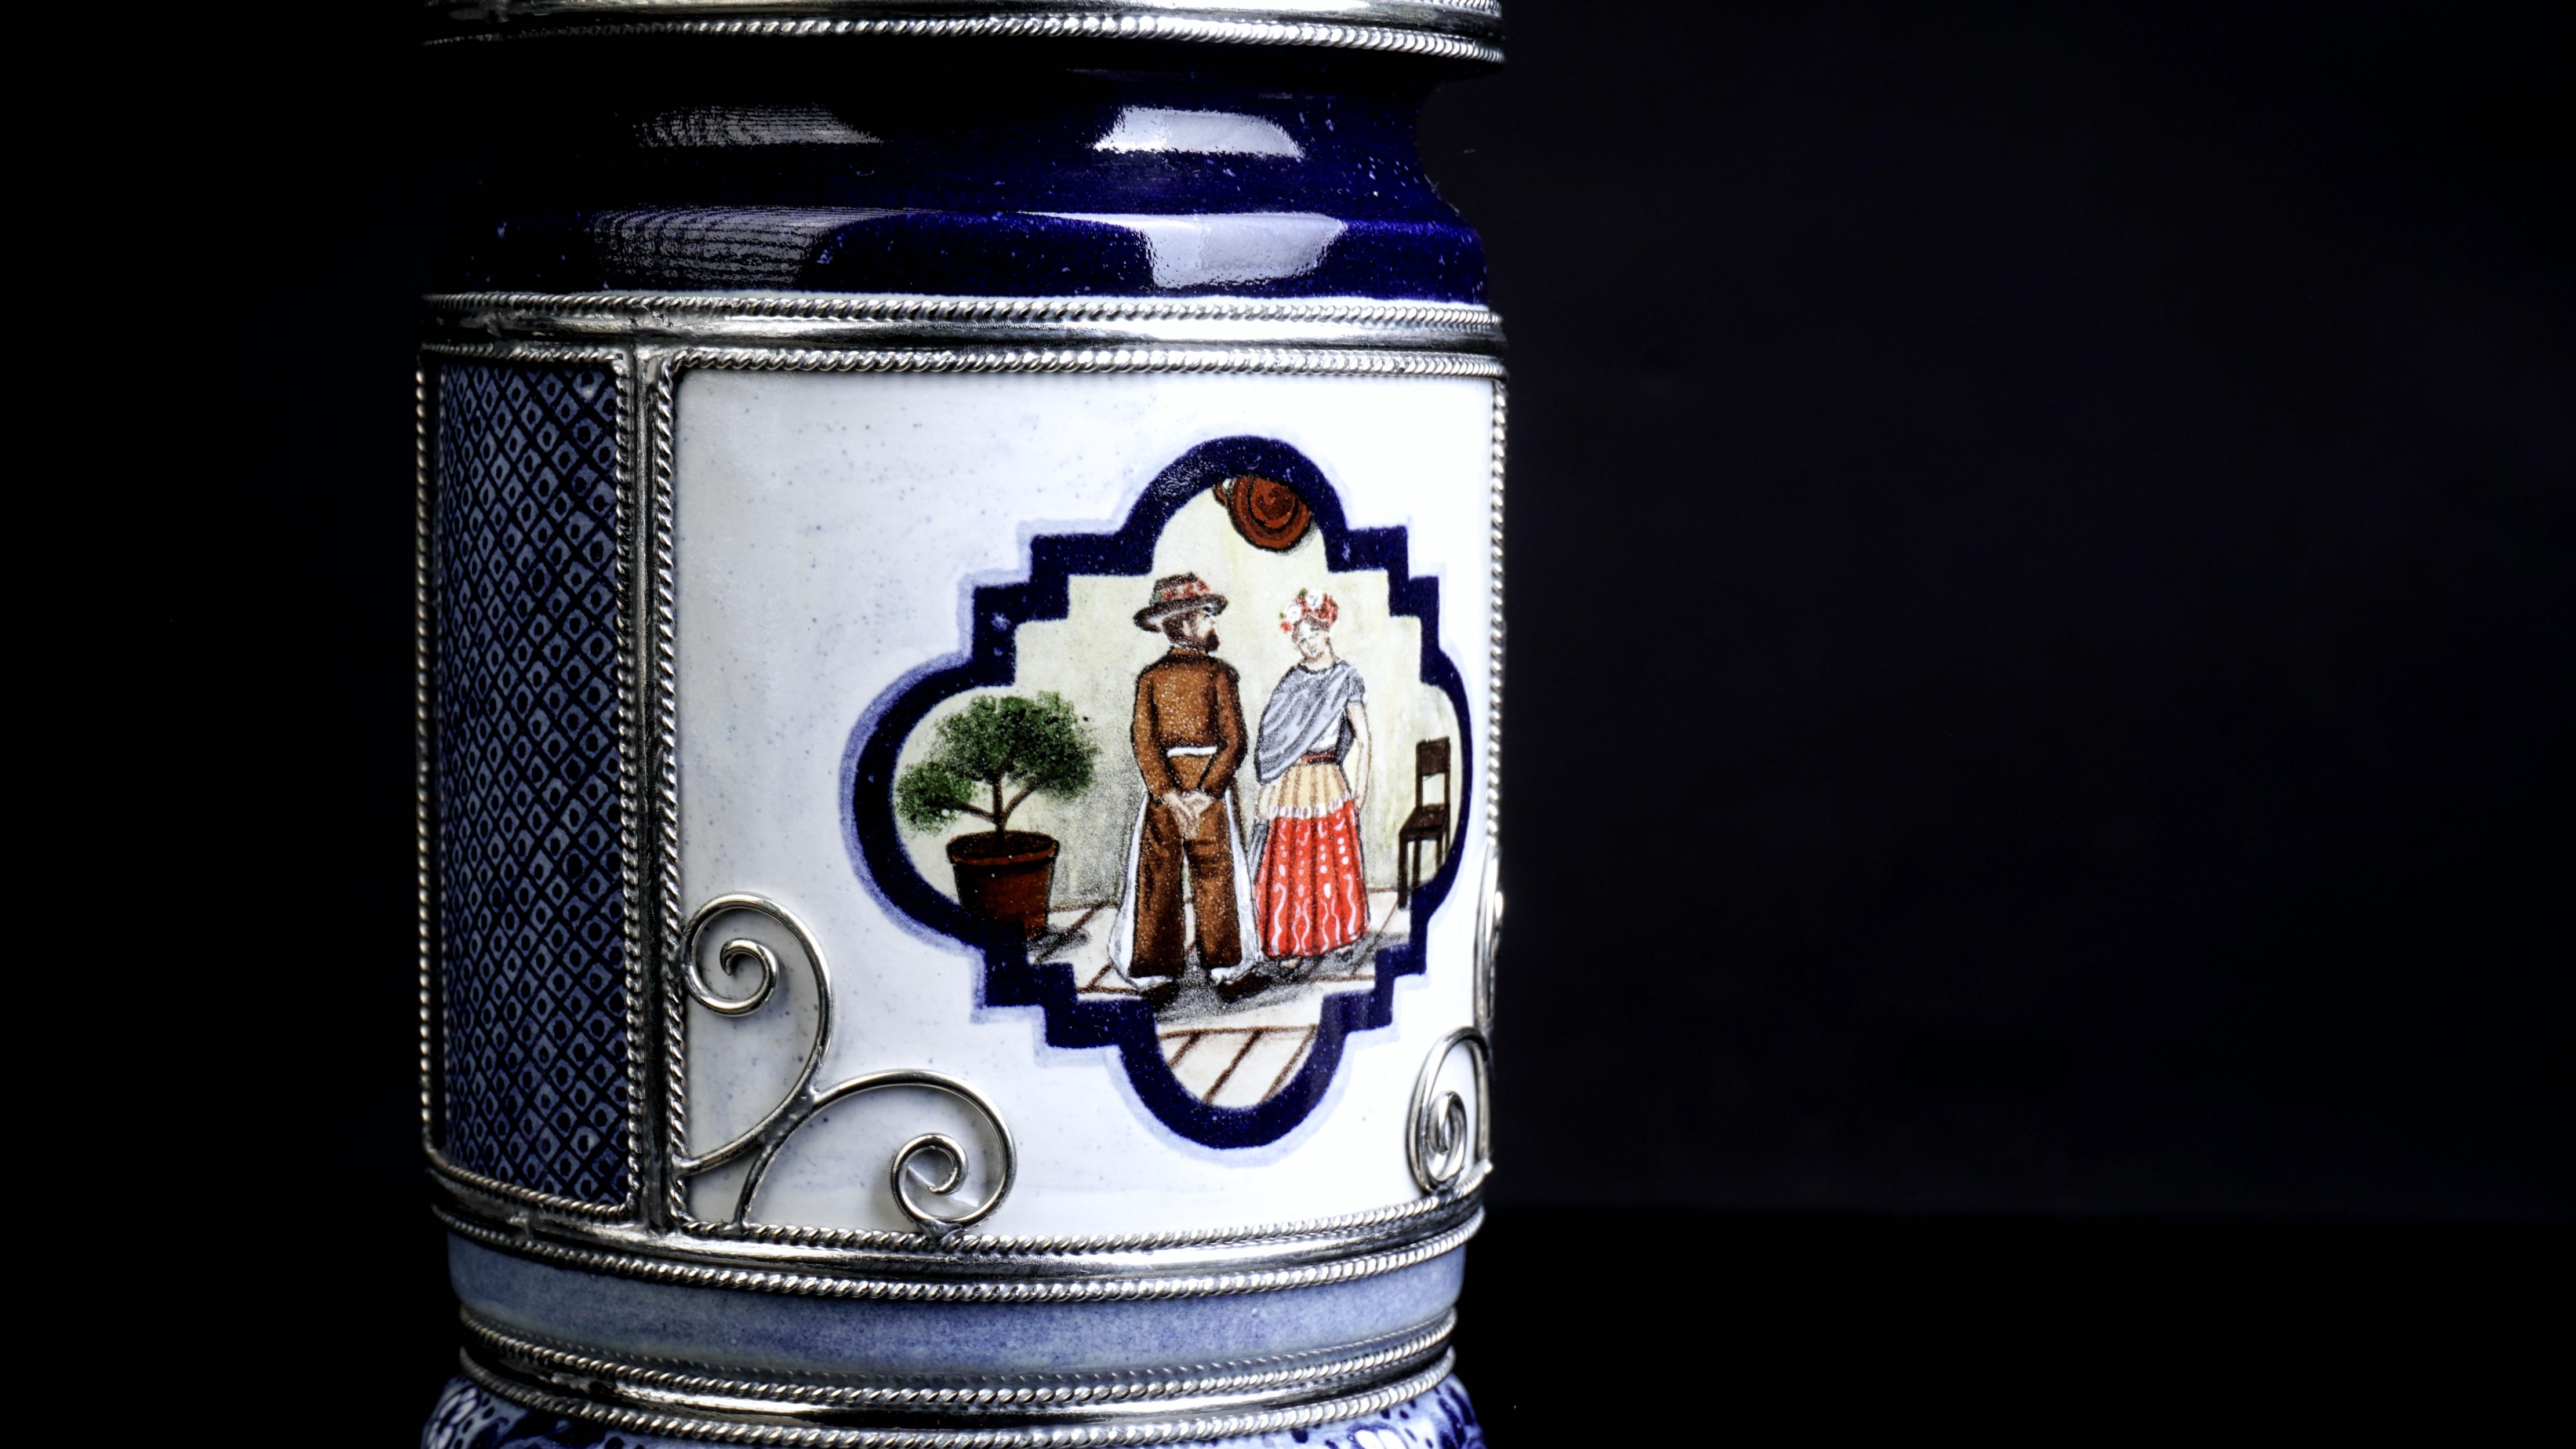 Ceramic and White Metal 'Alpaca' Jar with Hand Painted Motives 1